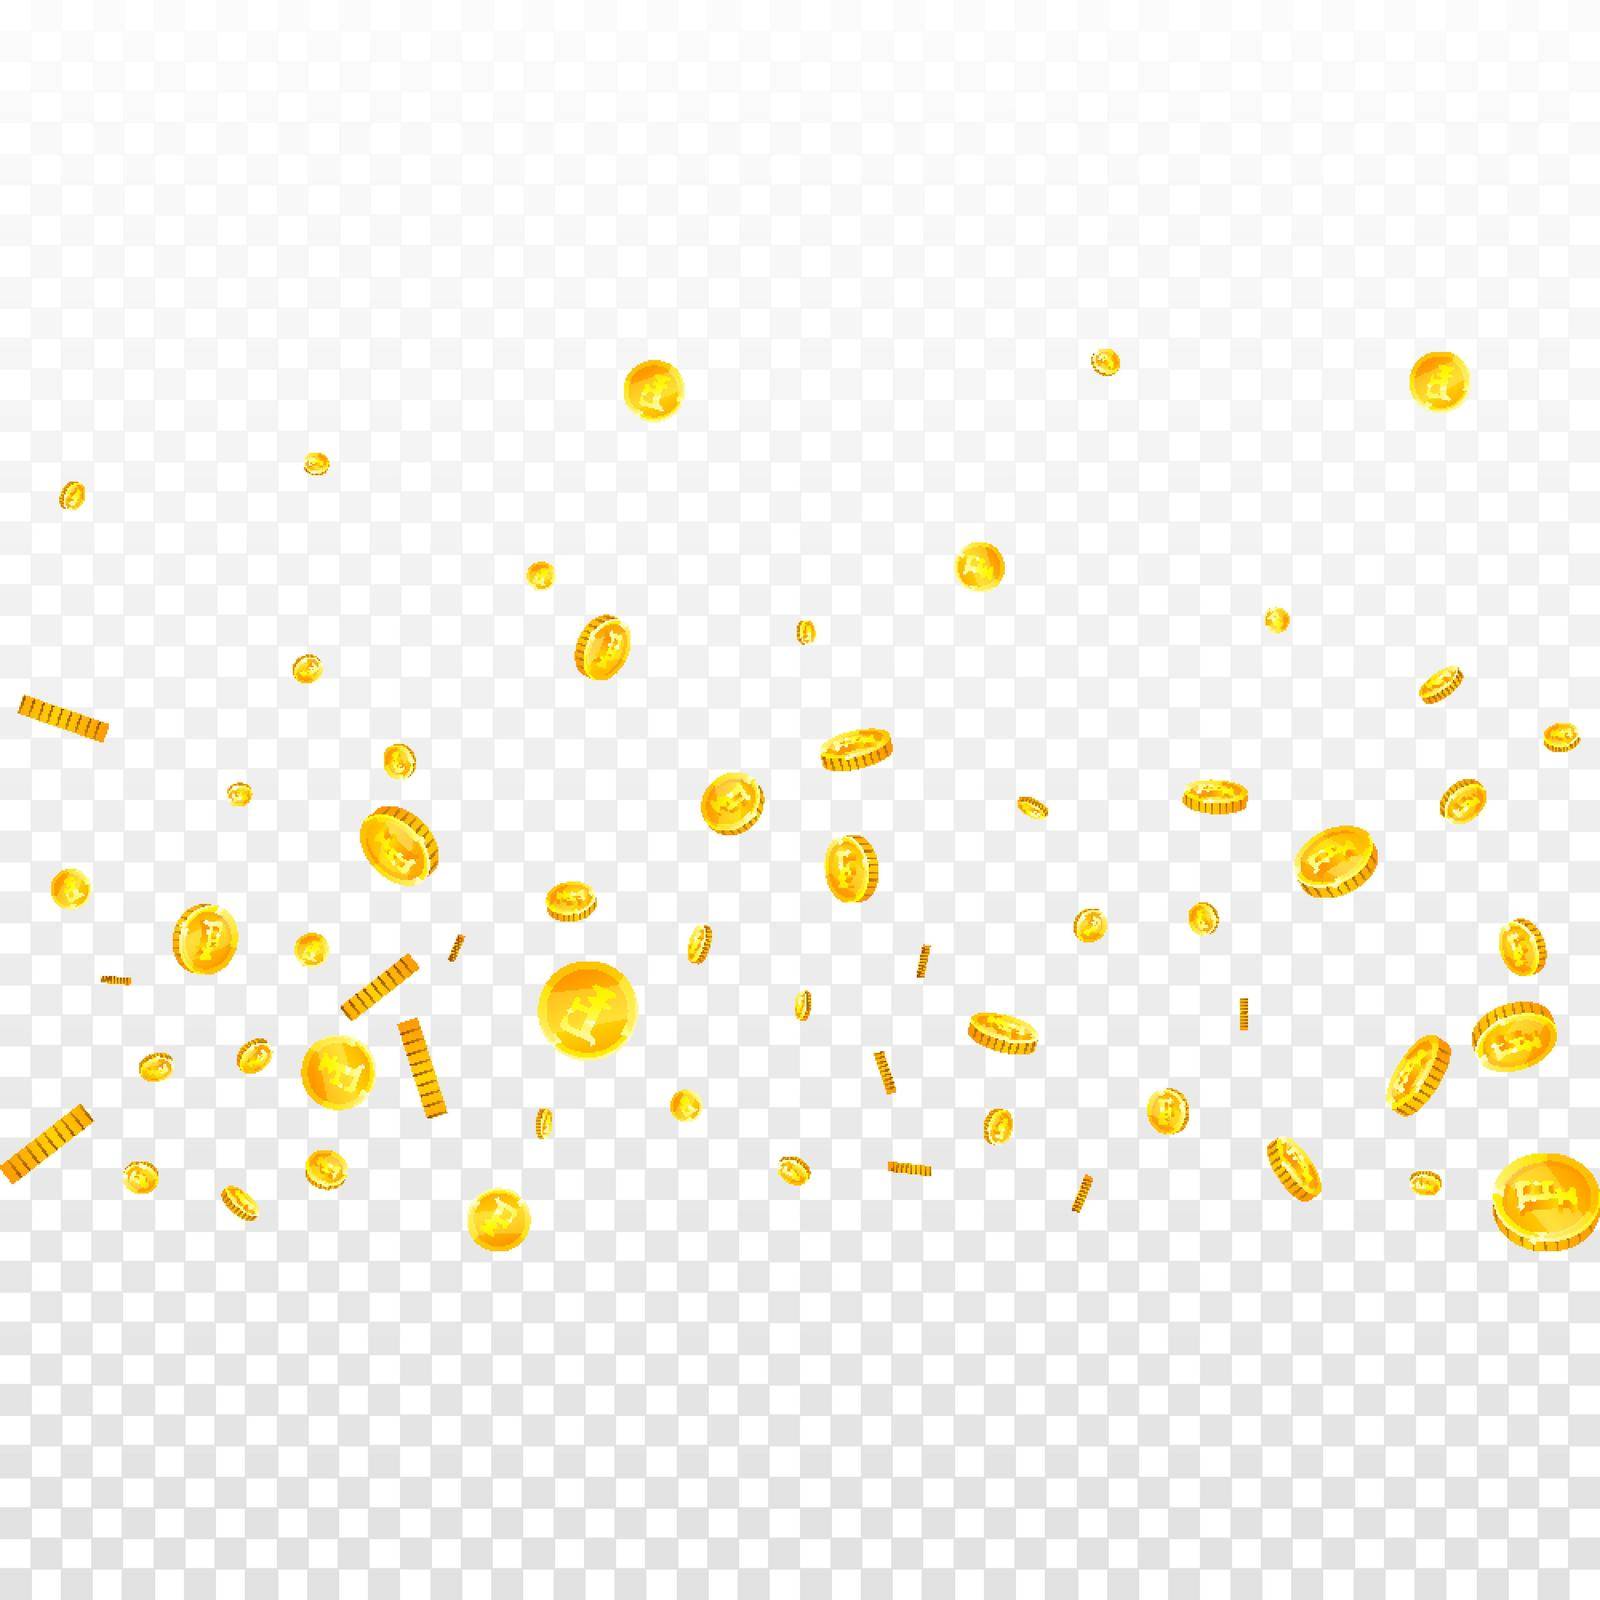 Swiss franc coins falling. Gold scattered CHF coins. Switzerland money. Great business success concept. Square vector illustration.